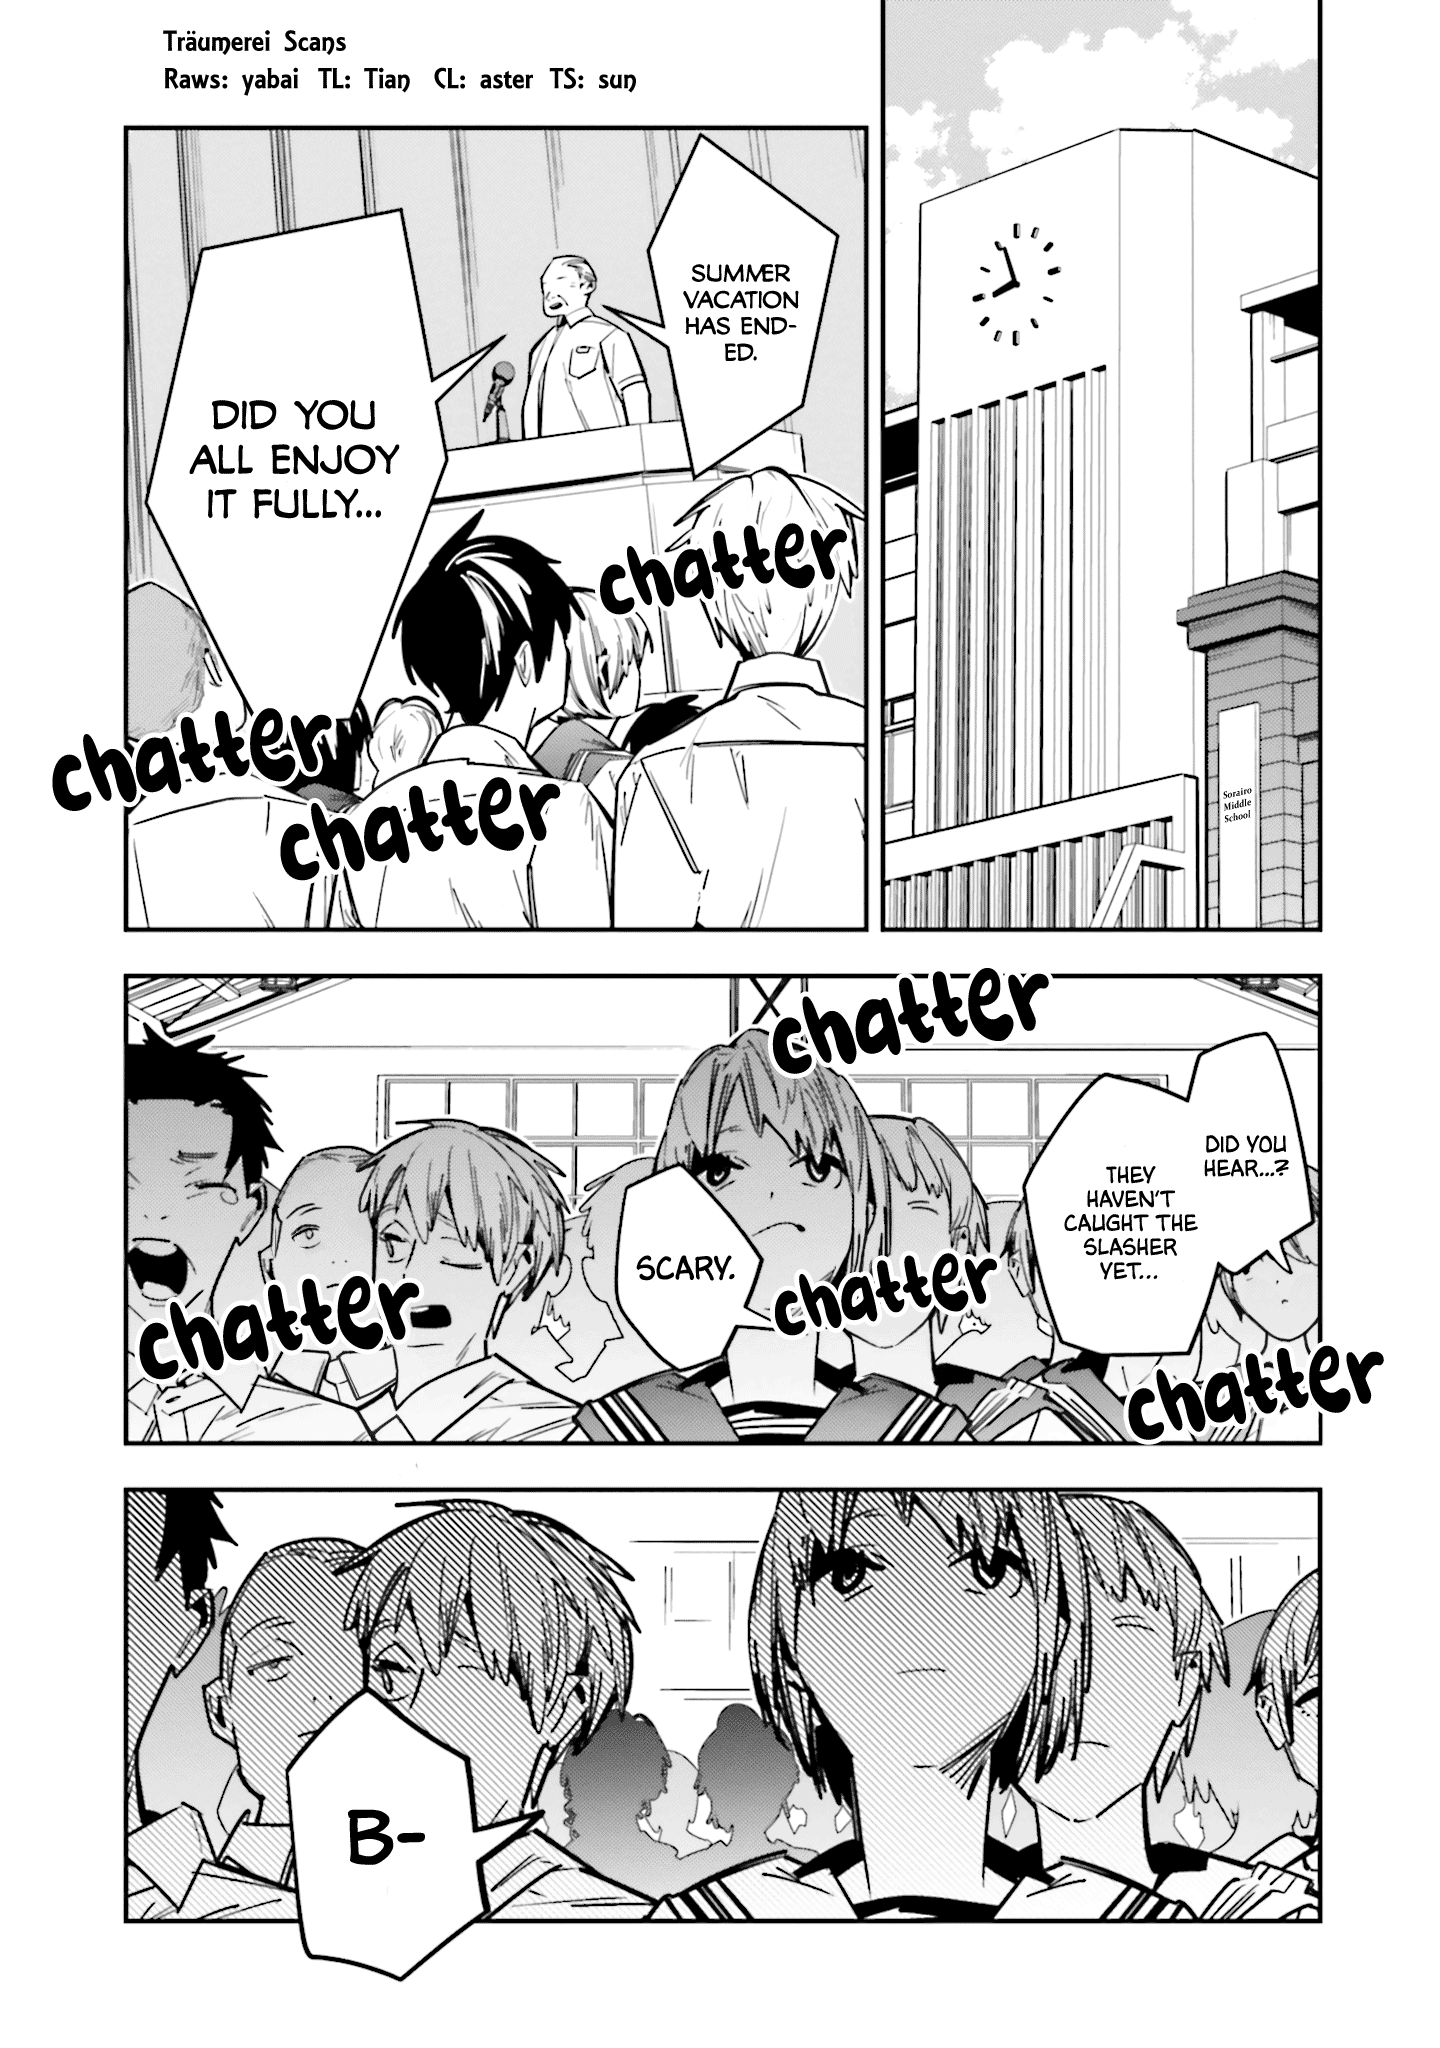 I Reincarnated As The Little Sister Of A Death Game Manga's Murder Mastermind And Failed Chapter 2 #2